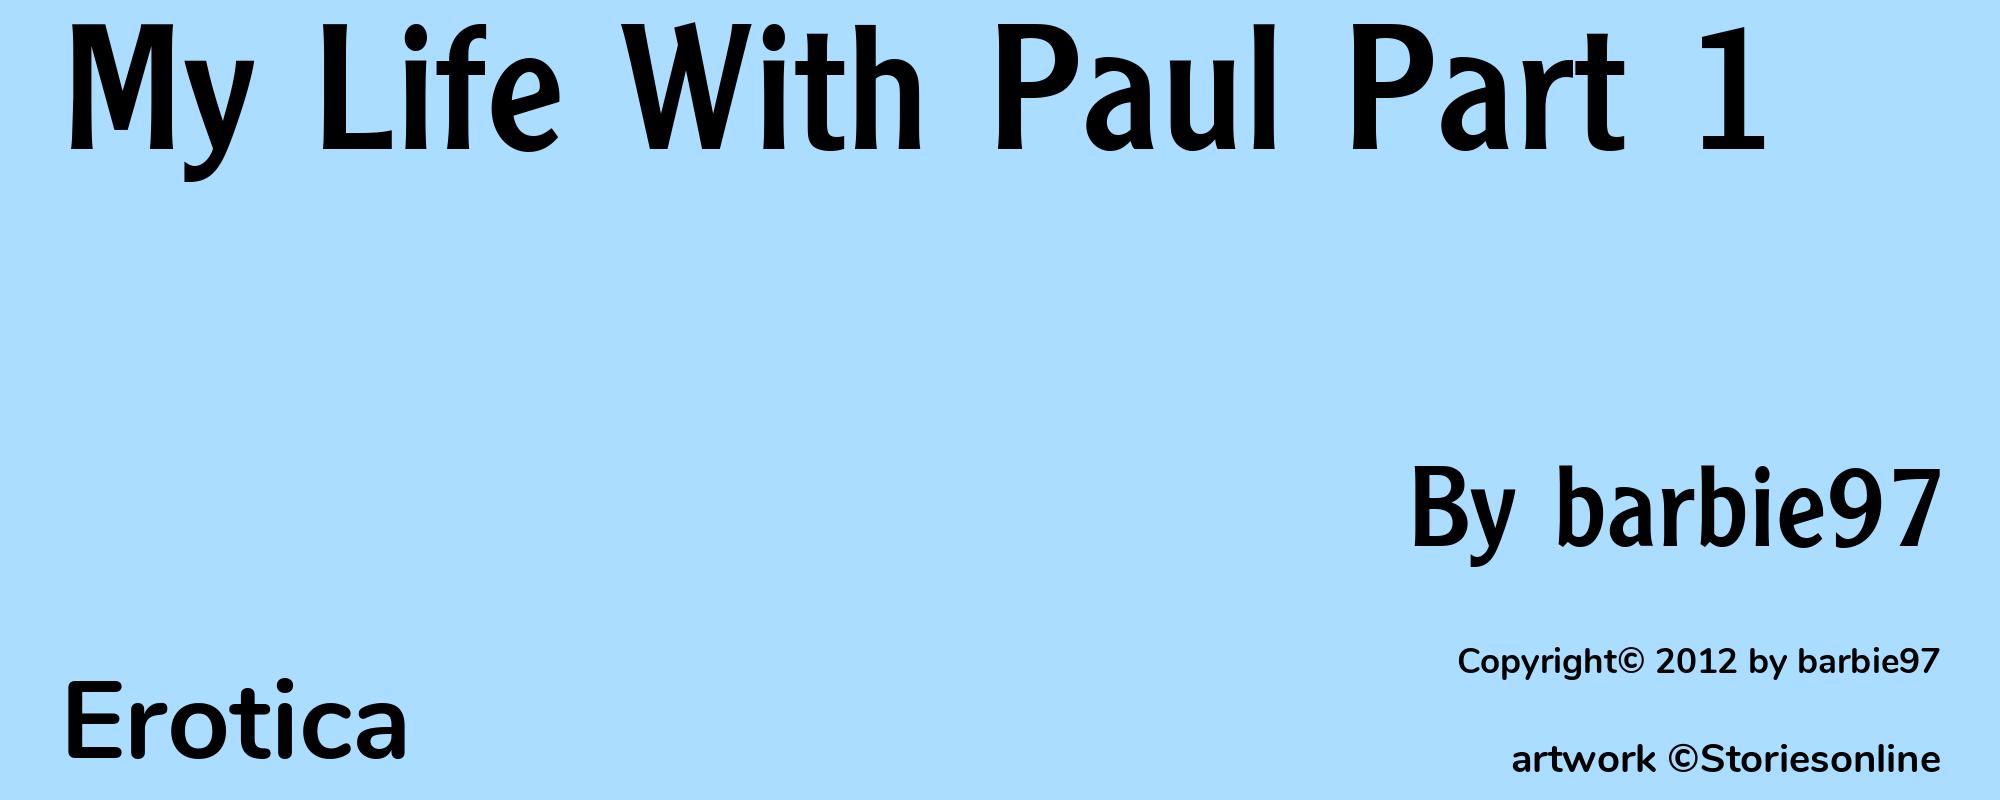 My Life With Paul Part 1 - Cover